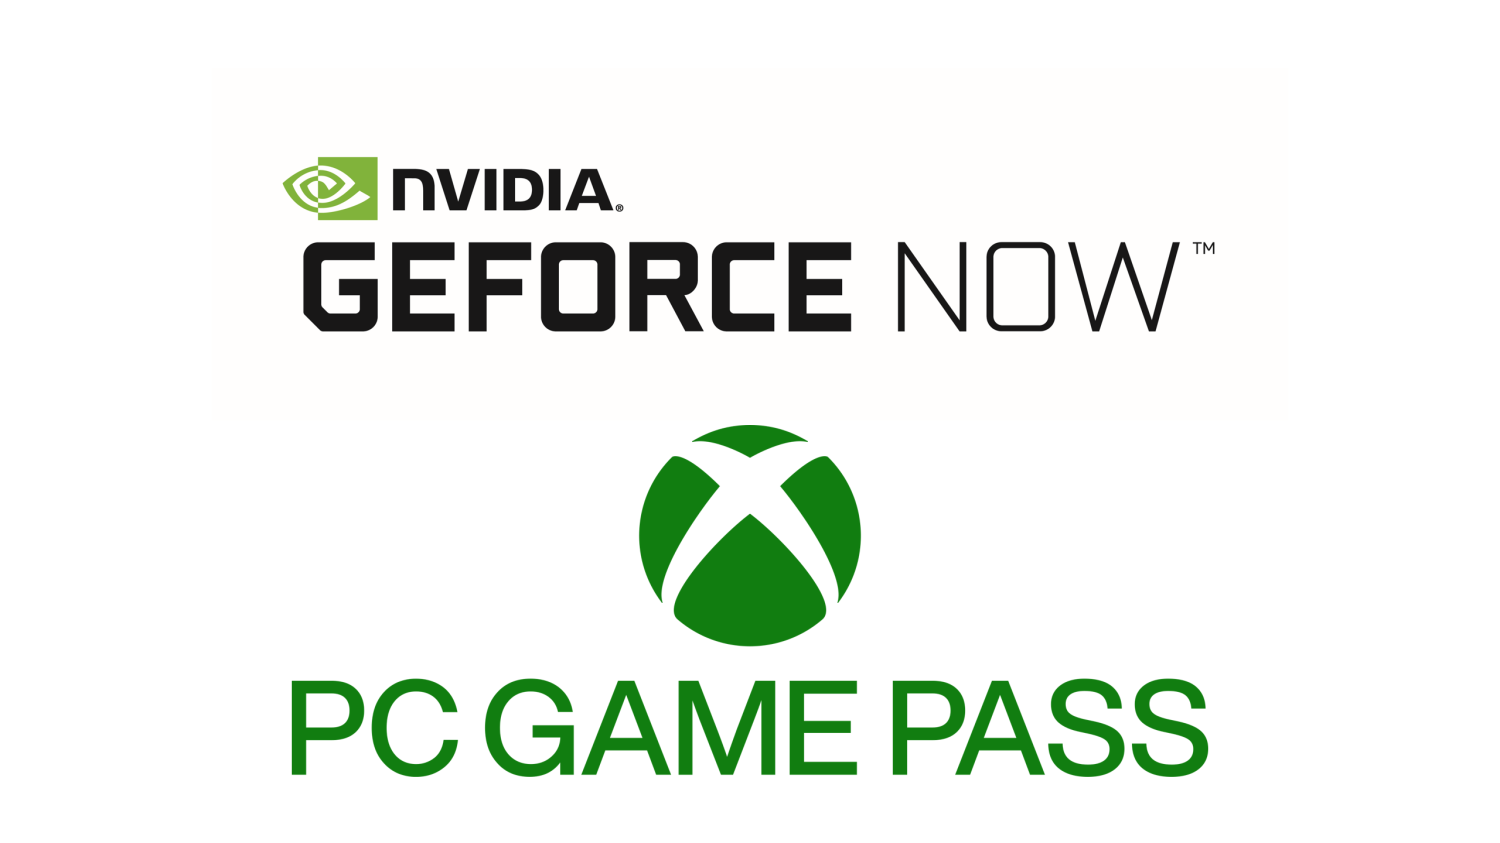 Xbox Game Pass for PC is now just PC Game Pass